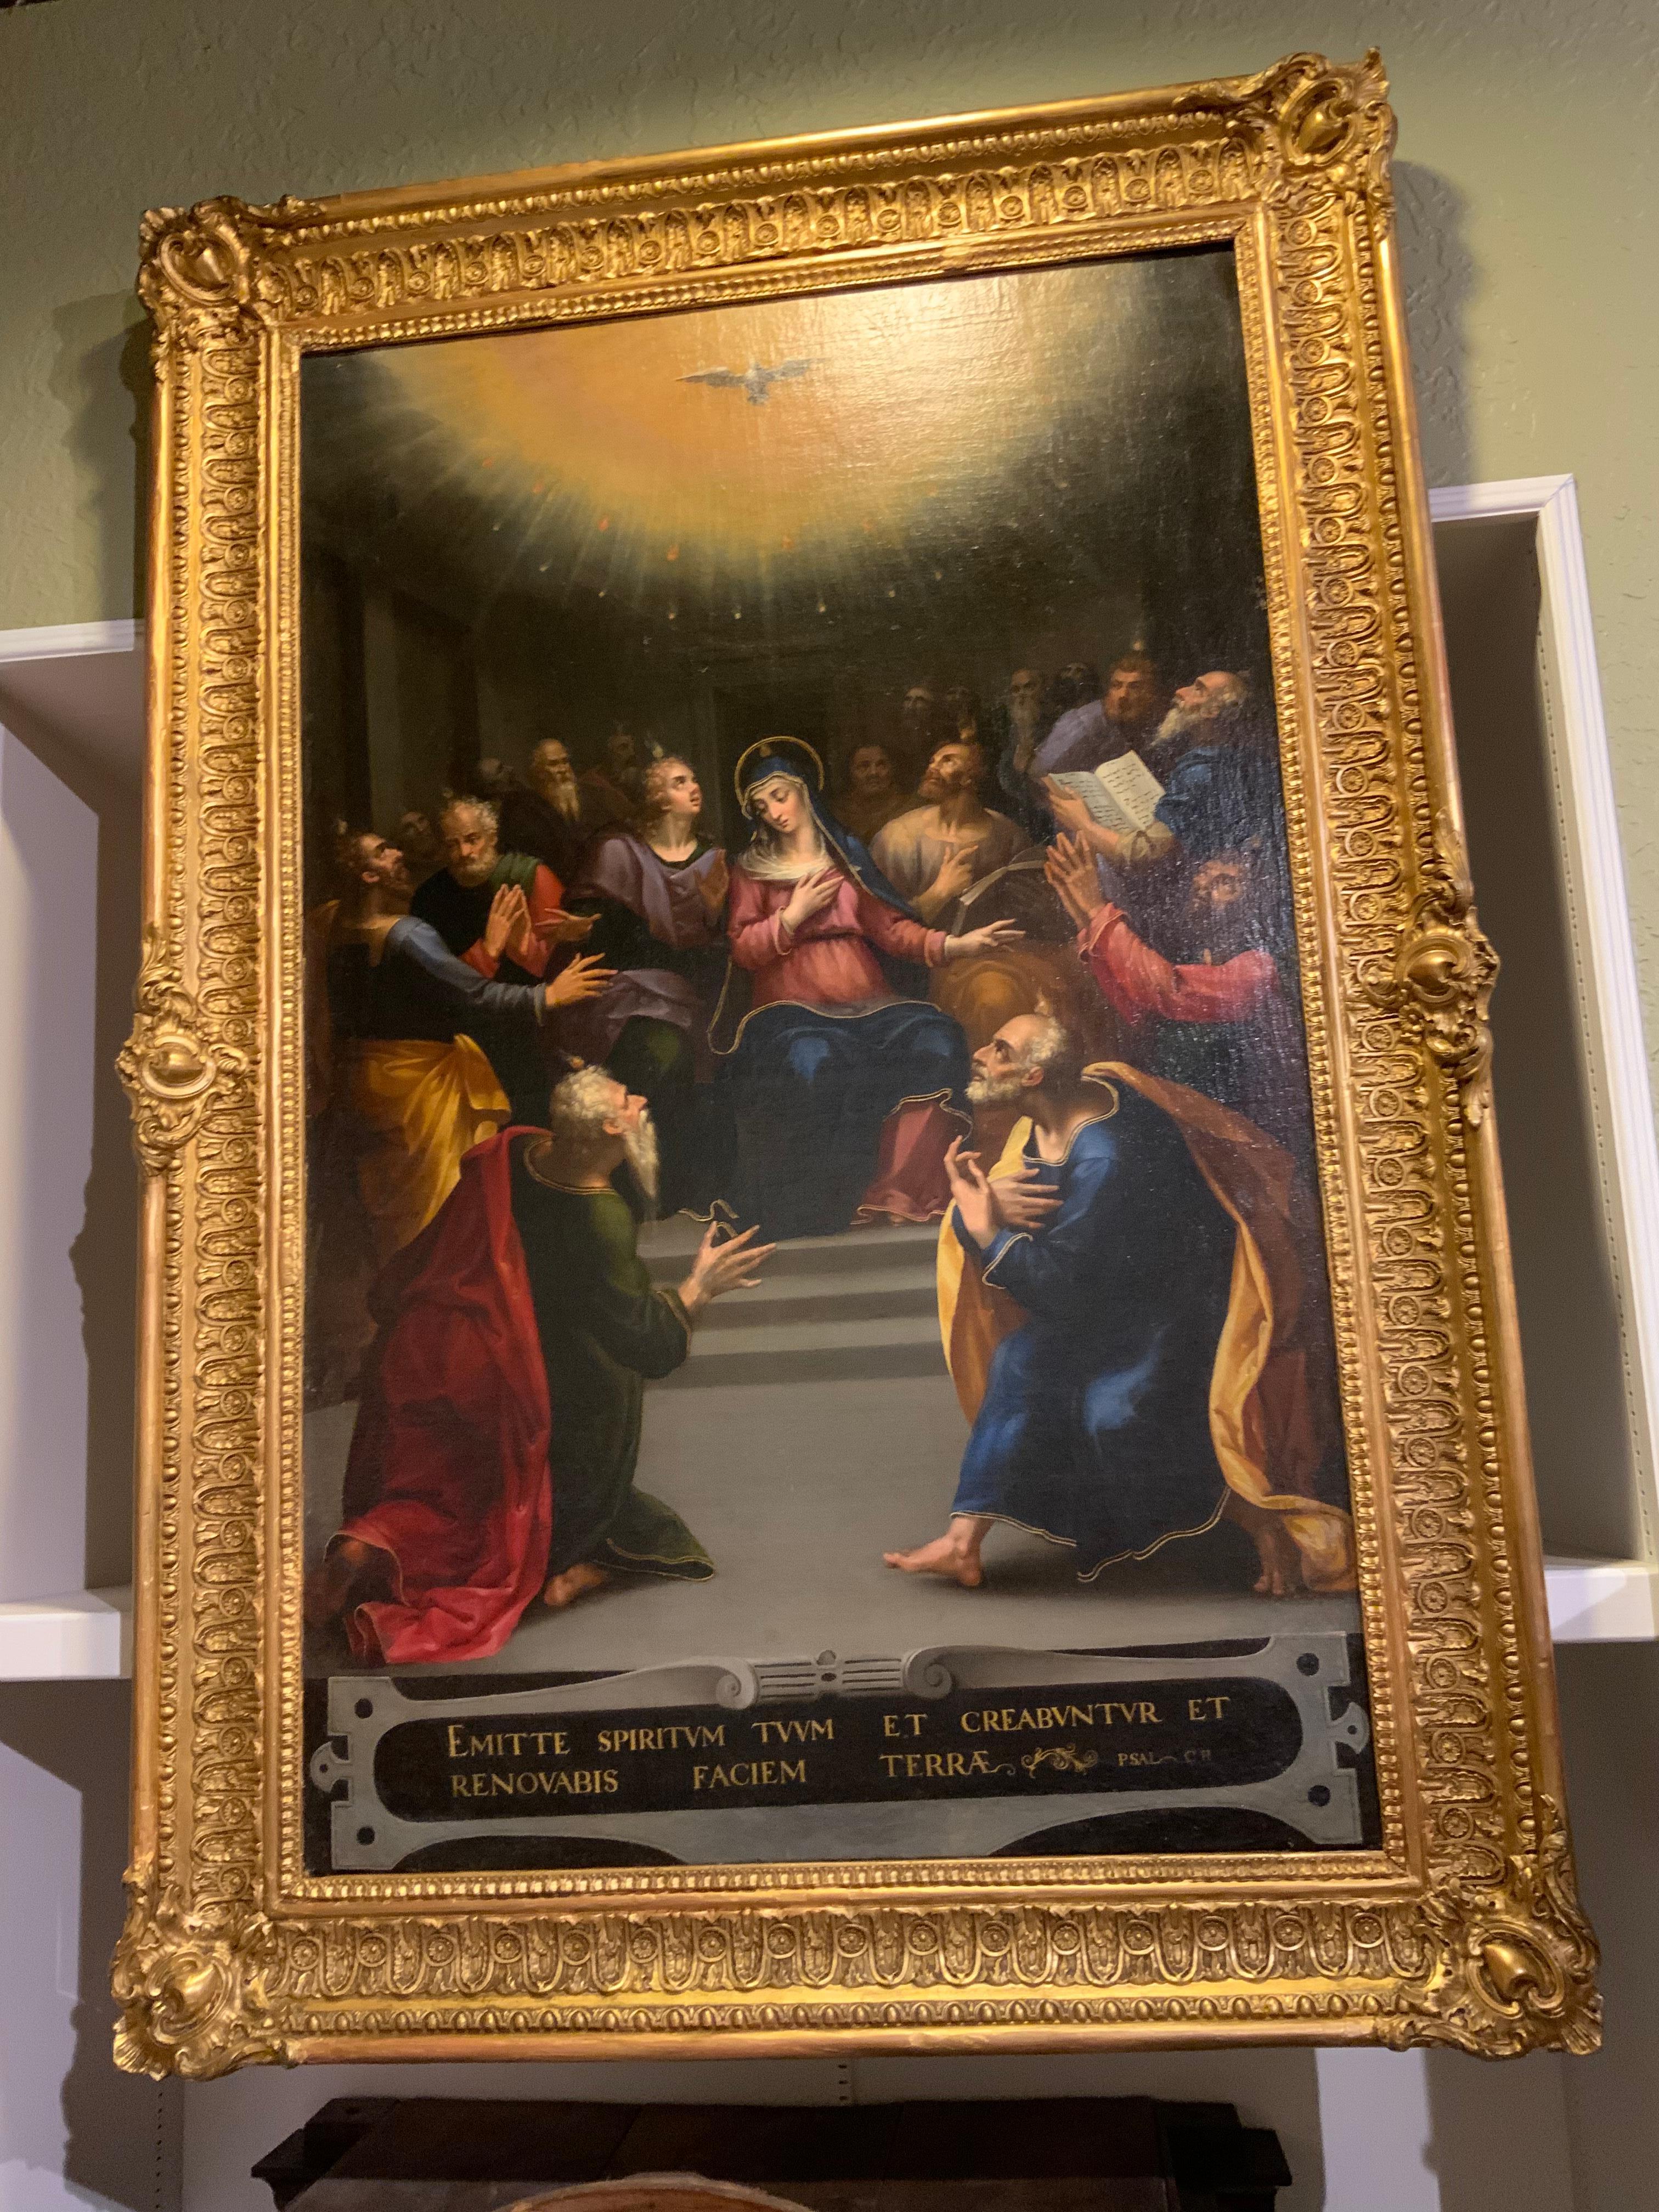 The exceptional use of color makes this painting very rich in dimension.
The faces and figures are well painted and portray the holy mother in
A very moving way. The hovering dove at the crest represents the holt
Spirit. The gilt wood frame is in